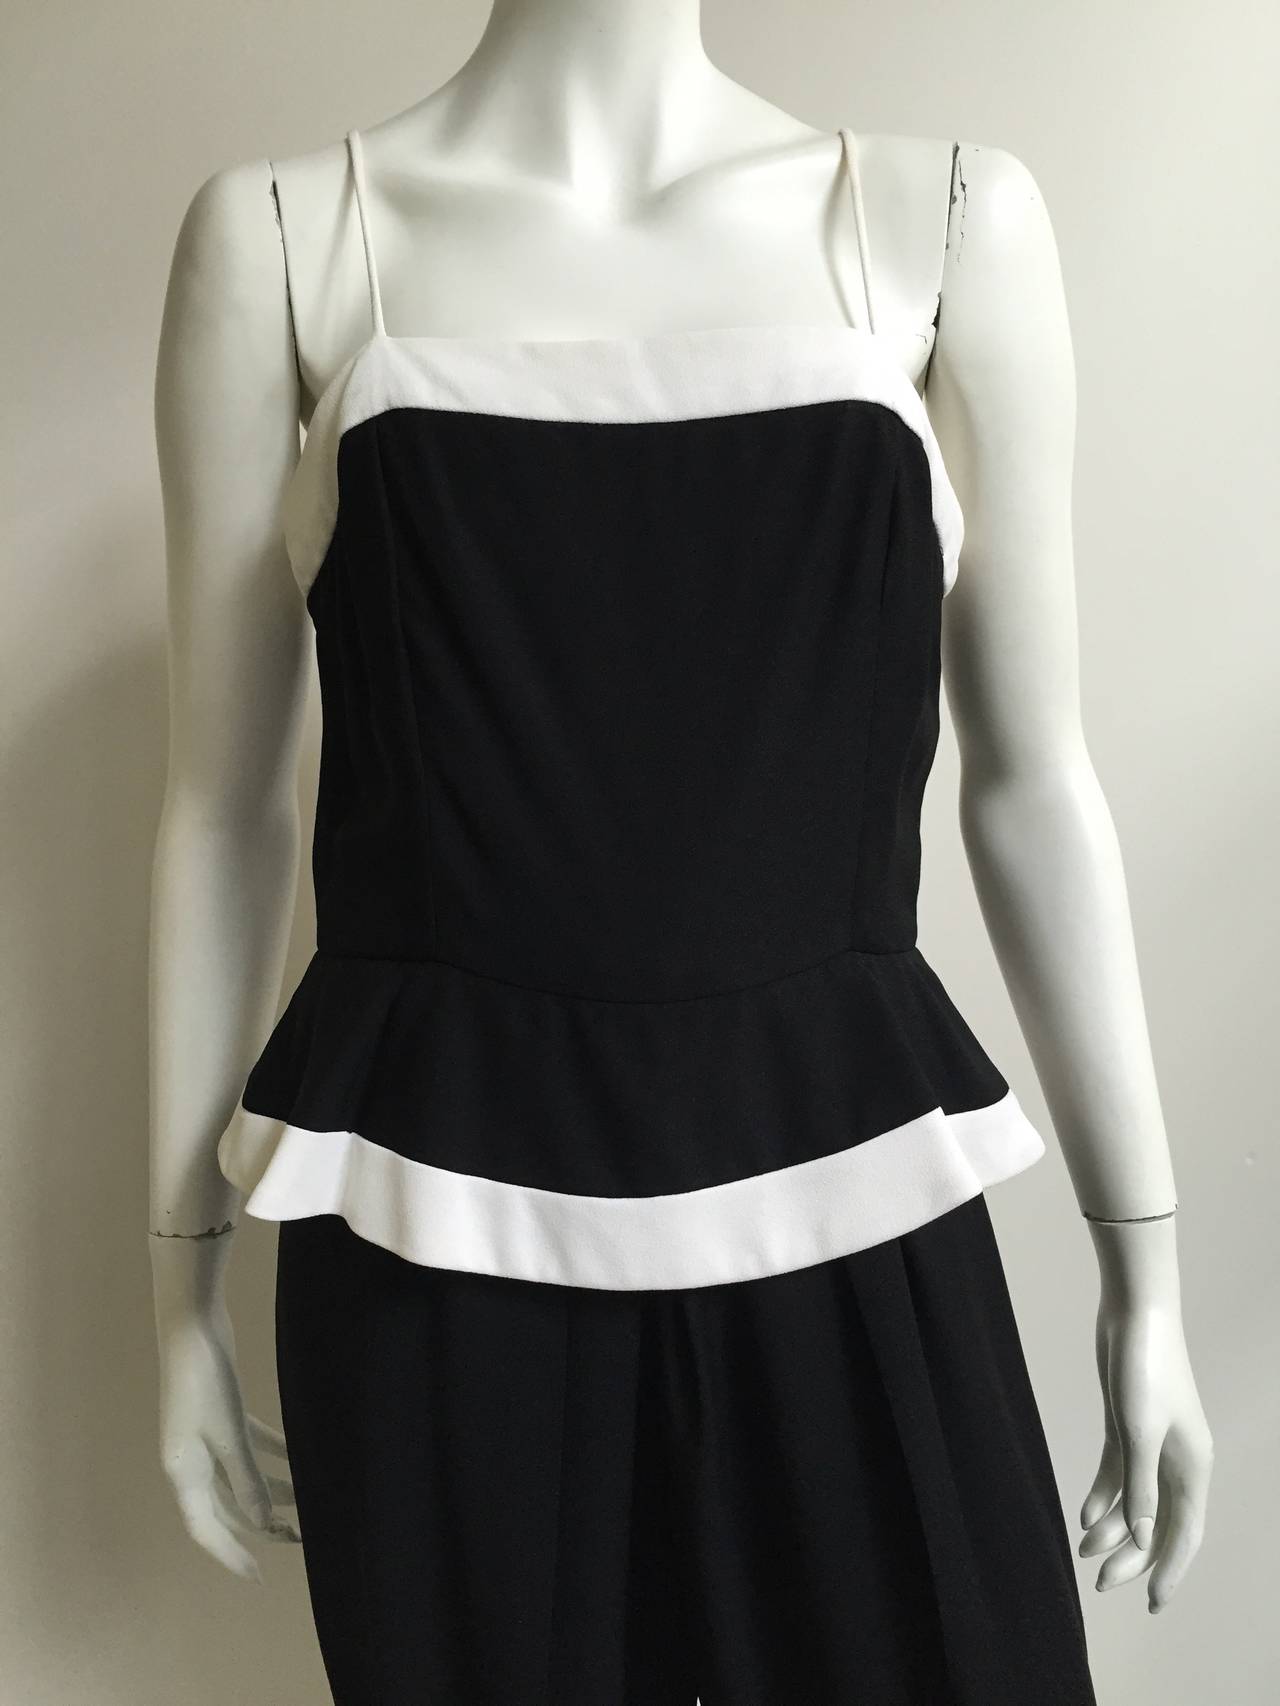 Raul Blanco Petites for Saks Fifth Avenue 1980s black / white peplum jumpsuit. Original size is 12 but fits like a modern size 8 (please see & use measurements). Ladies please use your measuring tape to properly measure your lovely body so you know